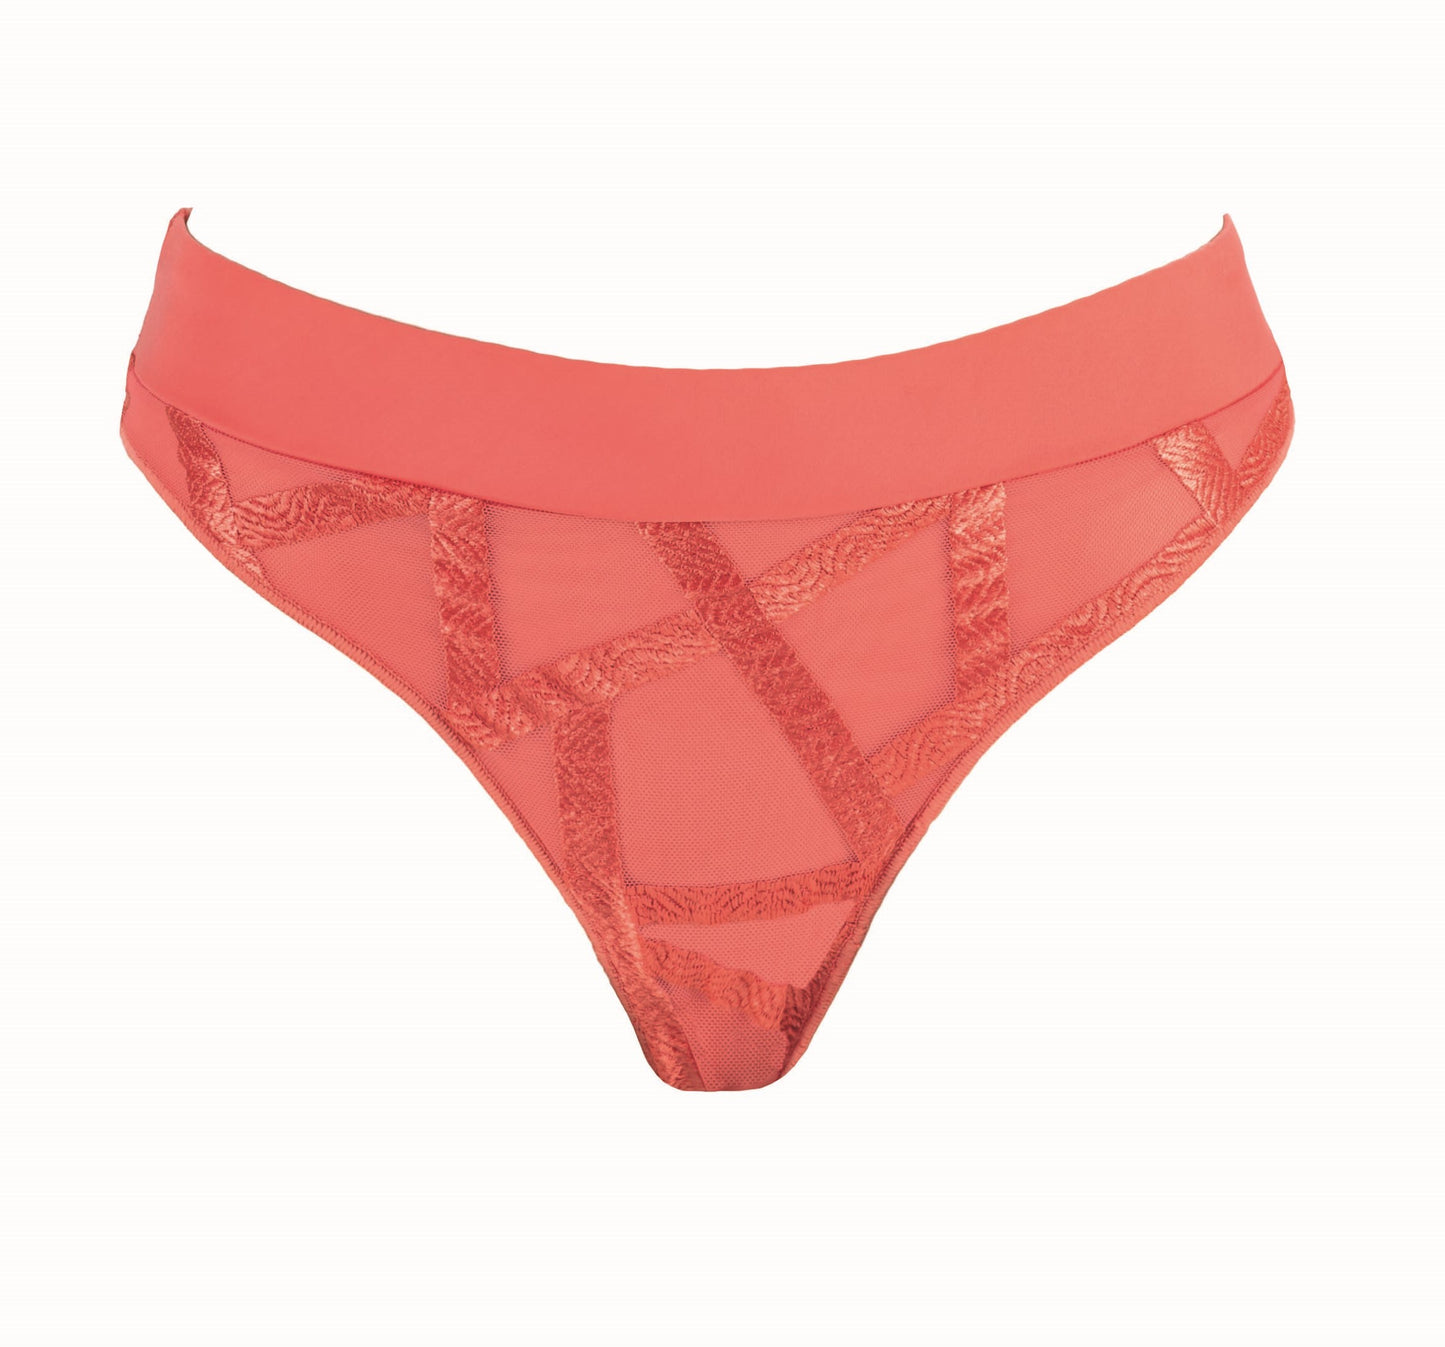 This brief from the Série line of Louisa Bracq includes an eye-catching combination of embroidery and semi-transparent tulle, offering an aesthetically pleasing and stylish look. Its lightweight, smooth and luxurious fabric ensures an optimal, comfortable fit for all sizes.